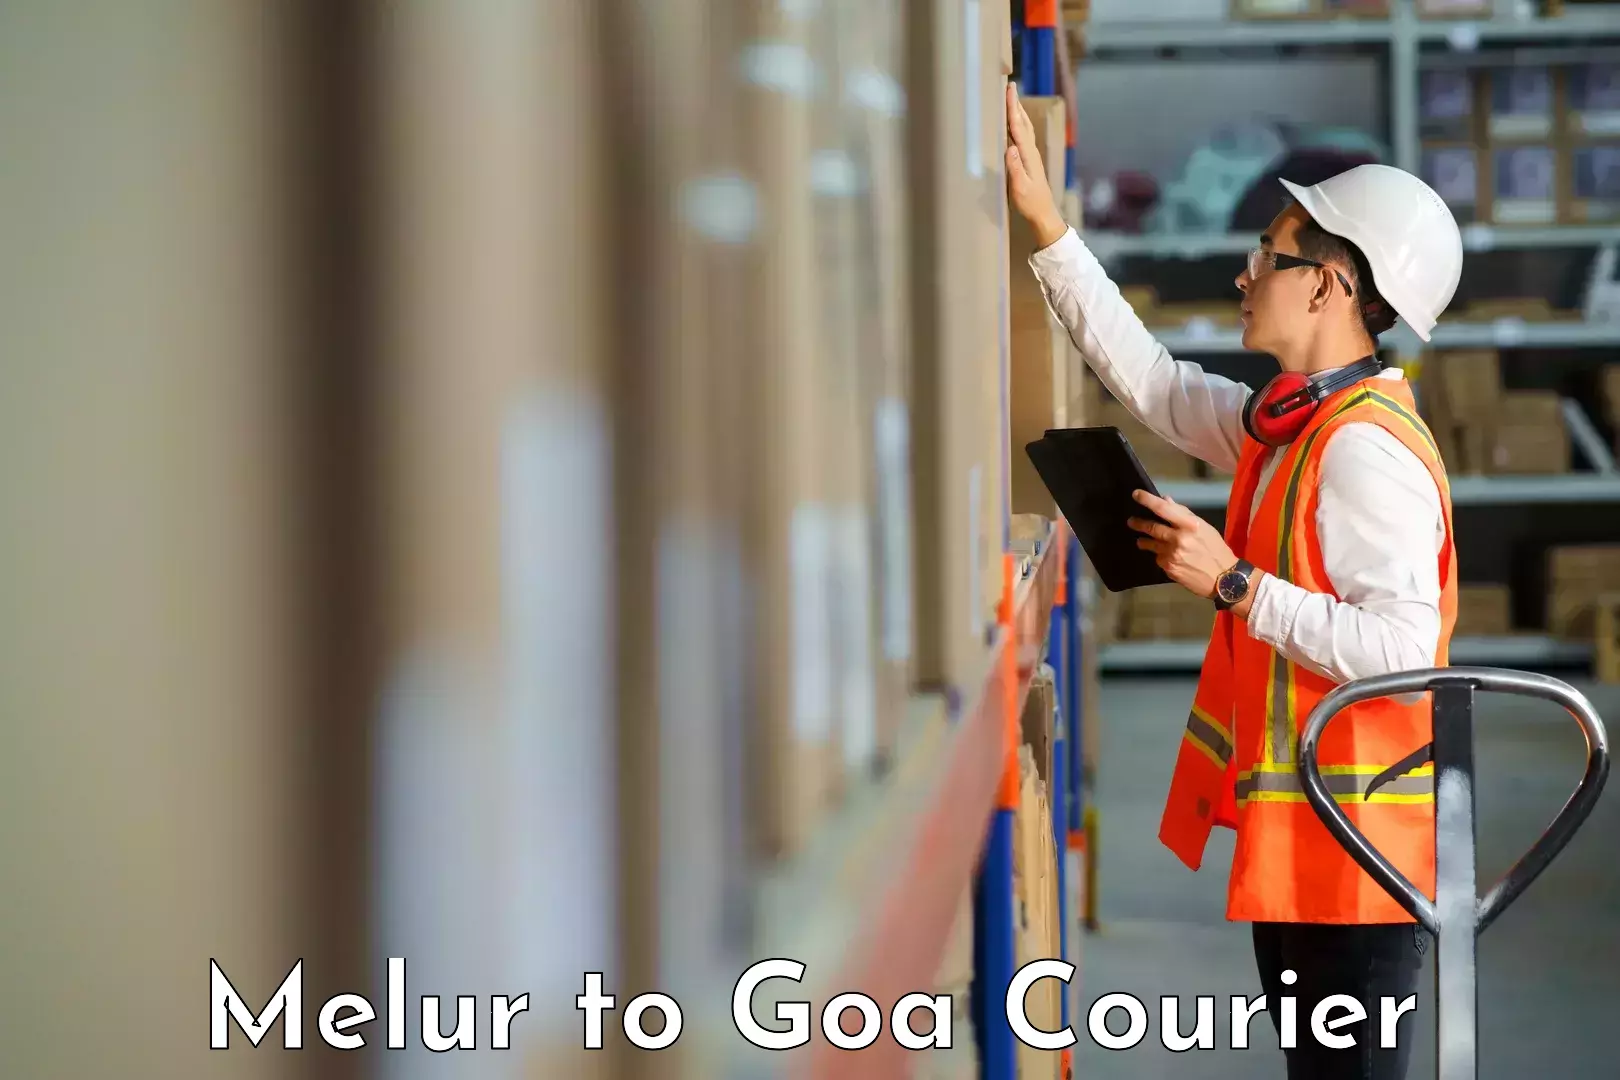 Sustainable delivery practices in Melur to Goa